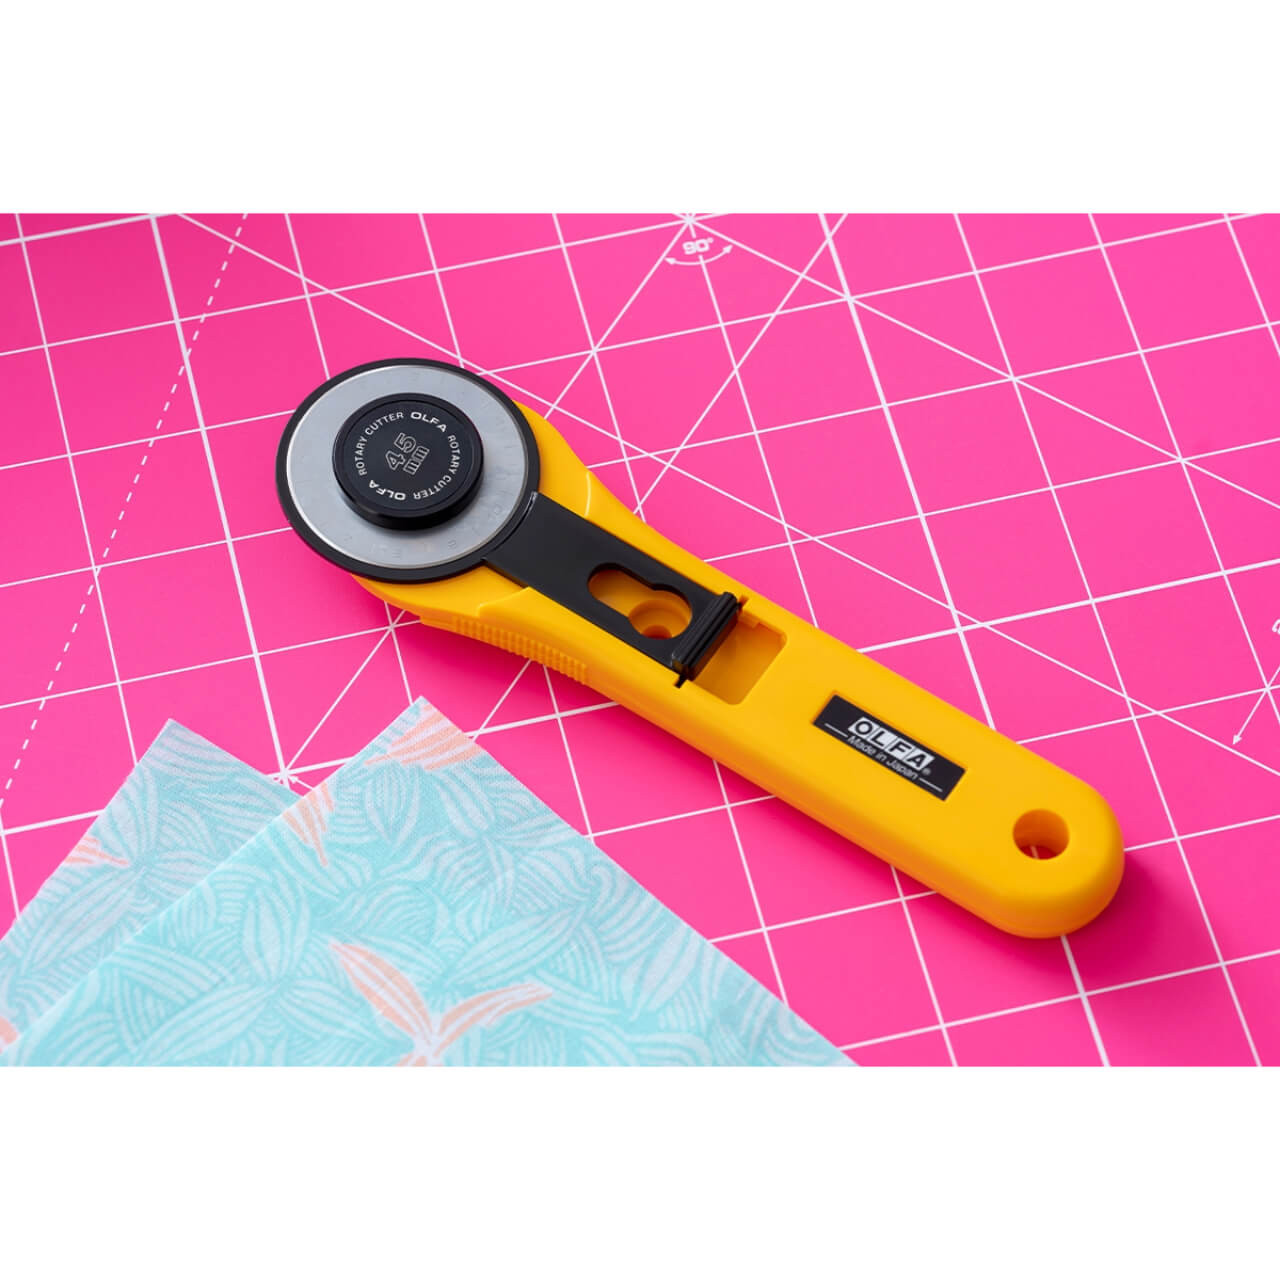 OLFA rotary cutter with a yellow handle and black circular blade on a pink OLFA cutting mat, alongside a piece of patterned fabric, ready for precision crafting.